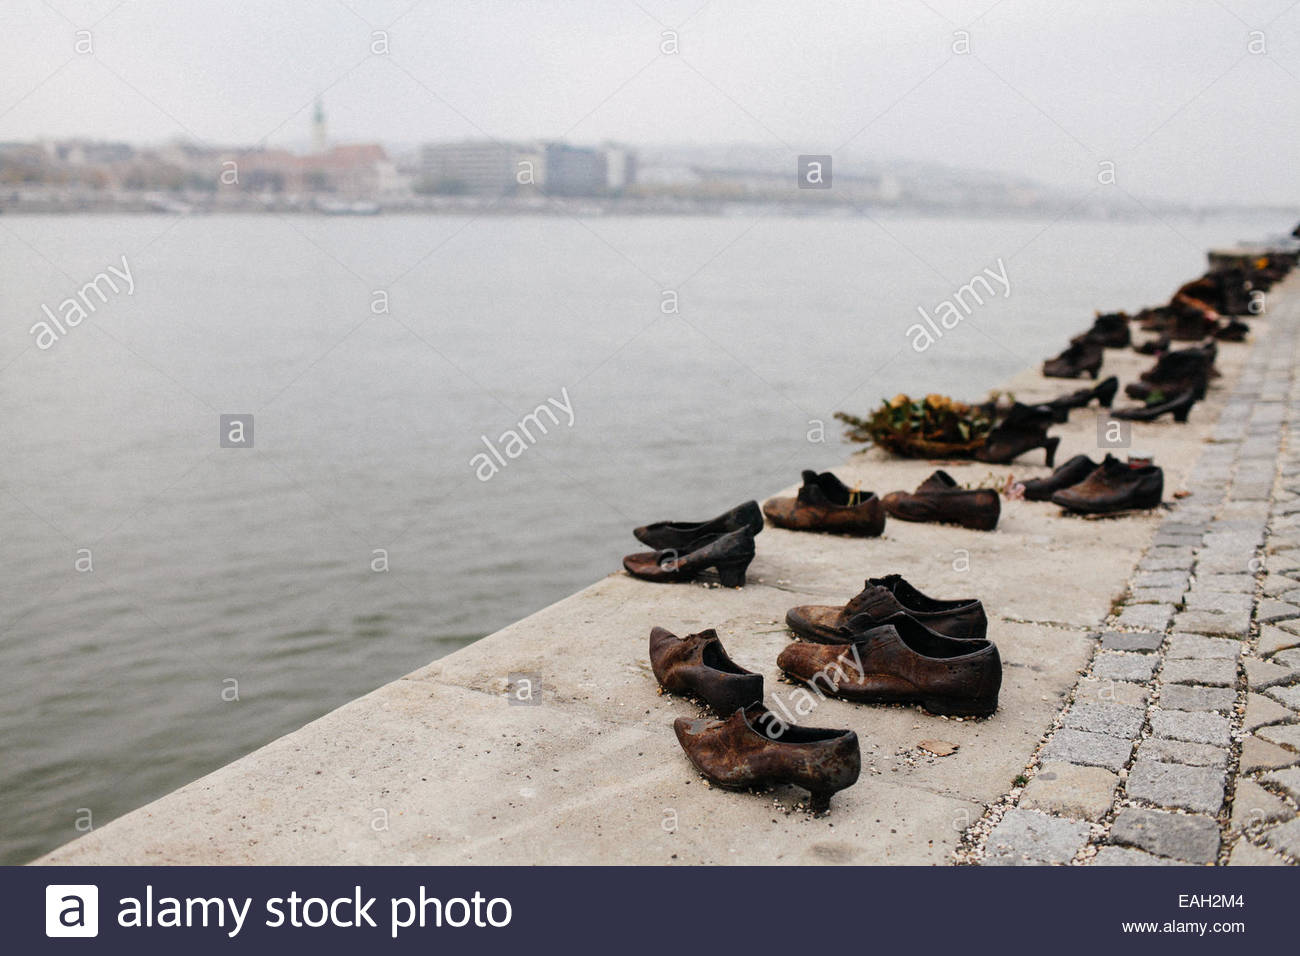 Shoes On The Danube Stock Photos & Shoes On The Danube Stock.